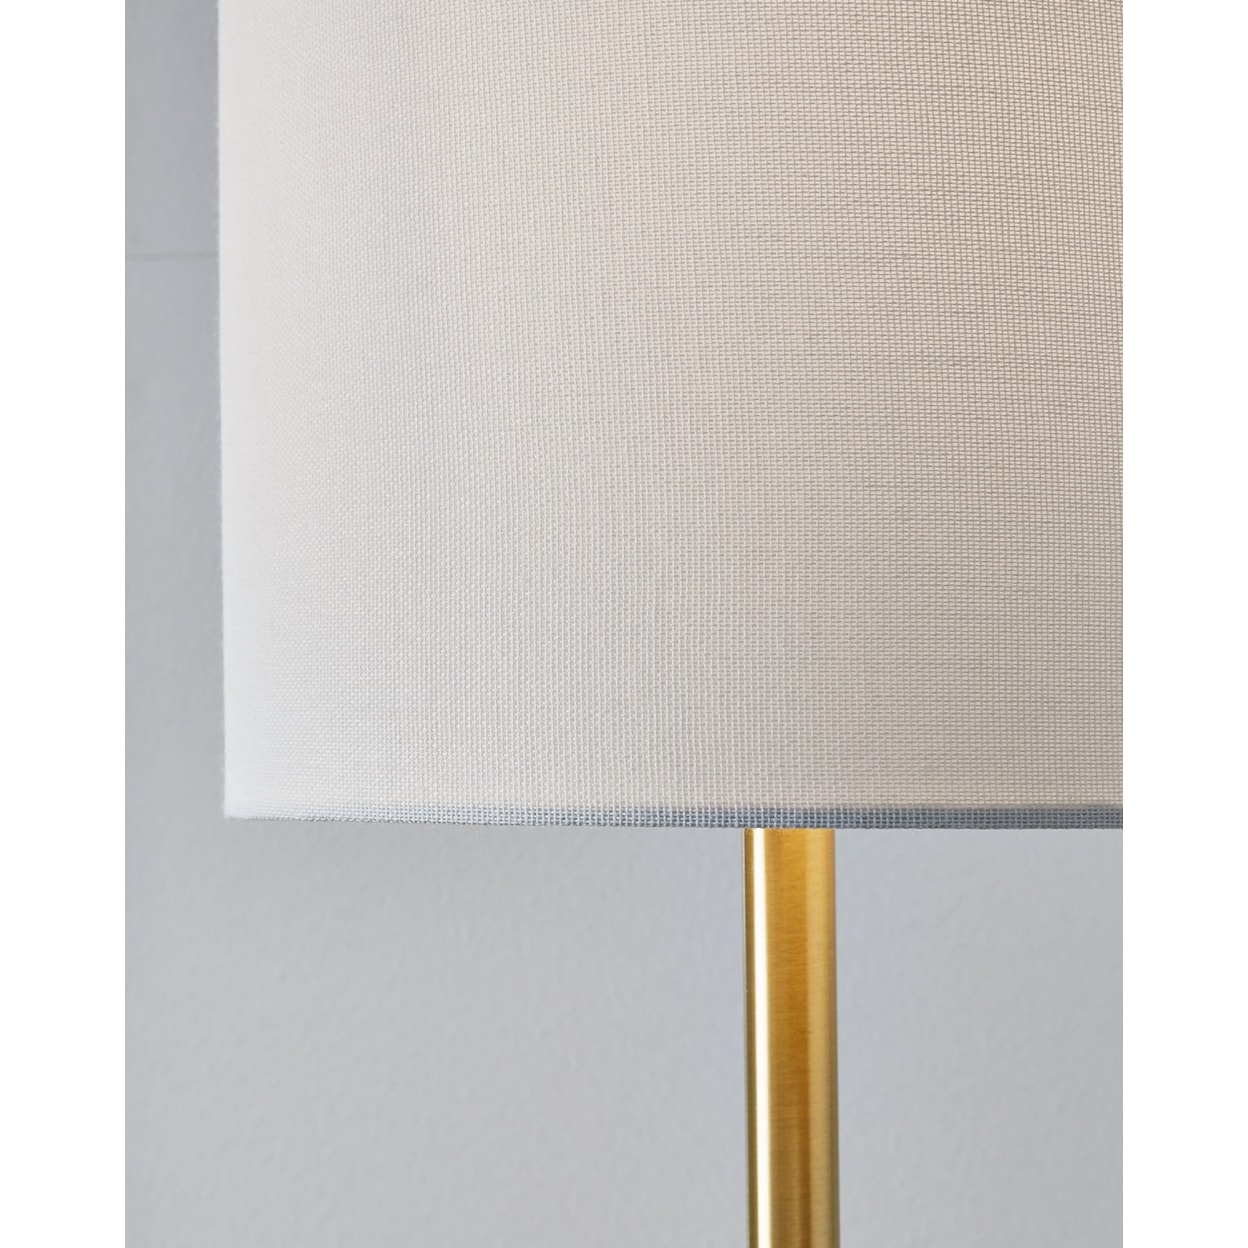 Signature Design by Ashley Maywick Table Lamp